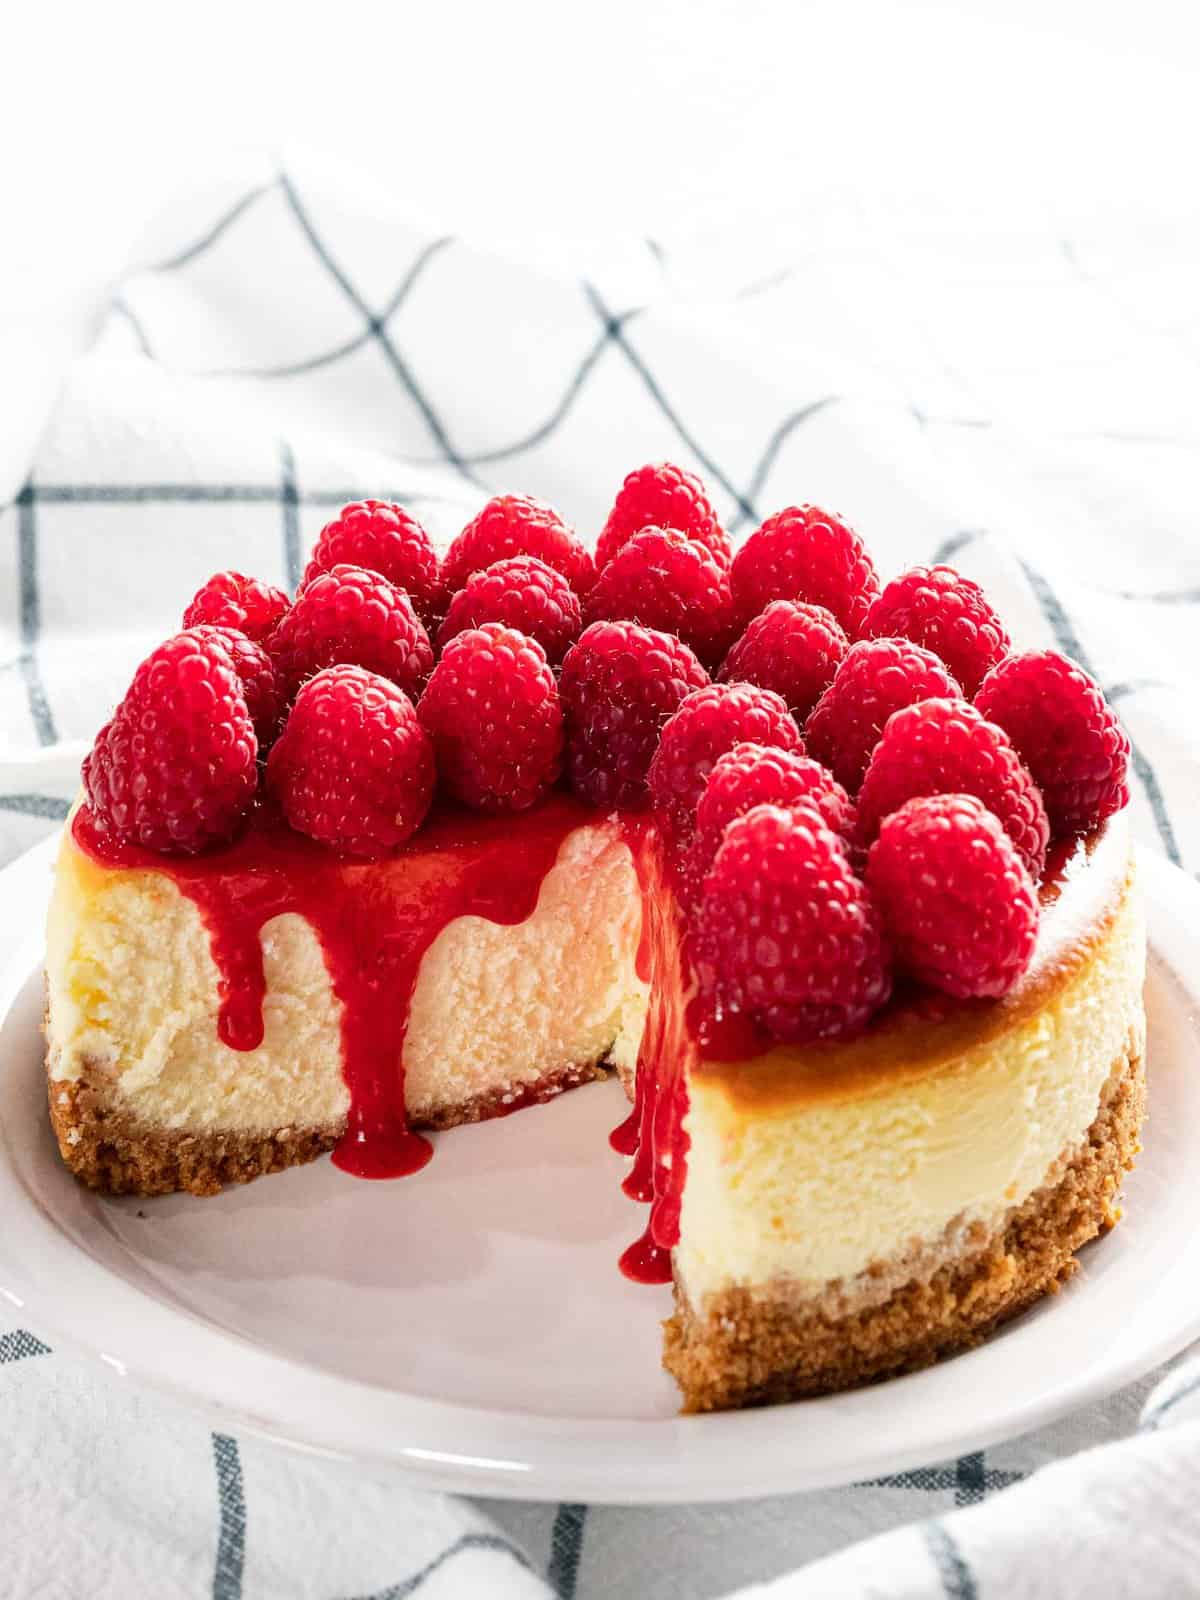 Raspberry cheesecake with fresh raspberry topping and sauce.